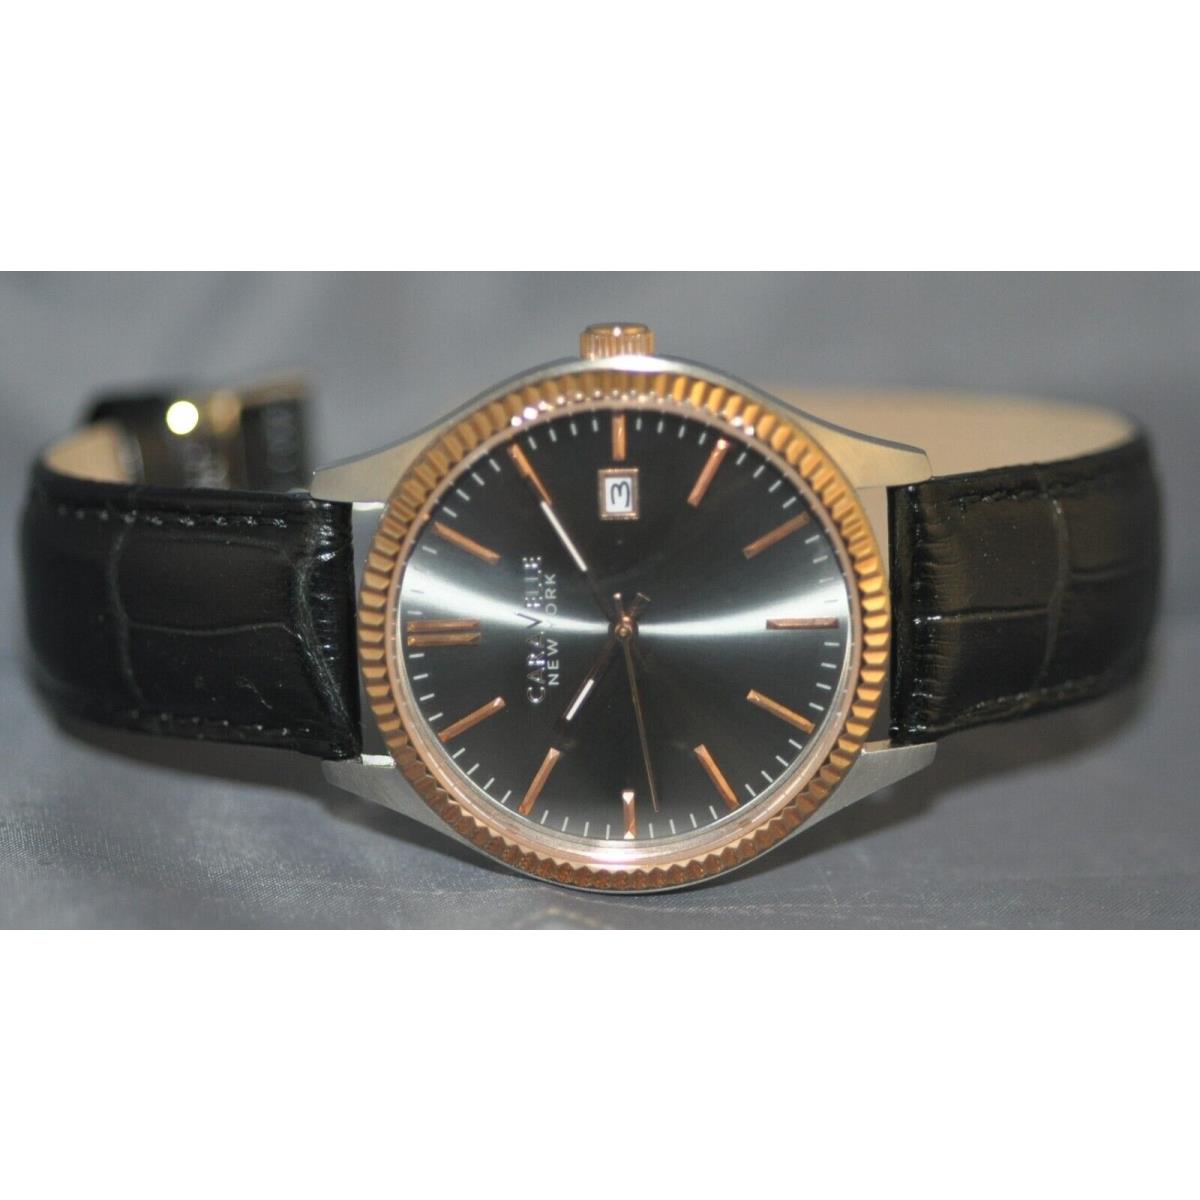 Caravelle York Unisex Grey Dial Black Leather Watch 45B131 - Dial: Gray, Band: Black, Bezel: Rose Gold